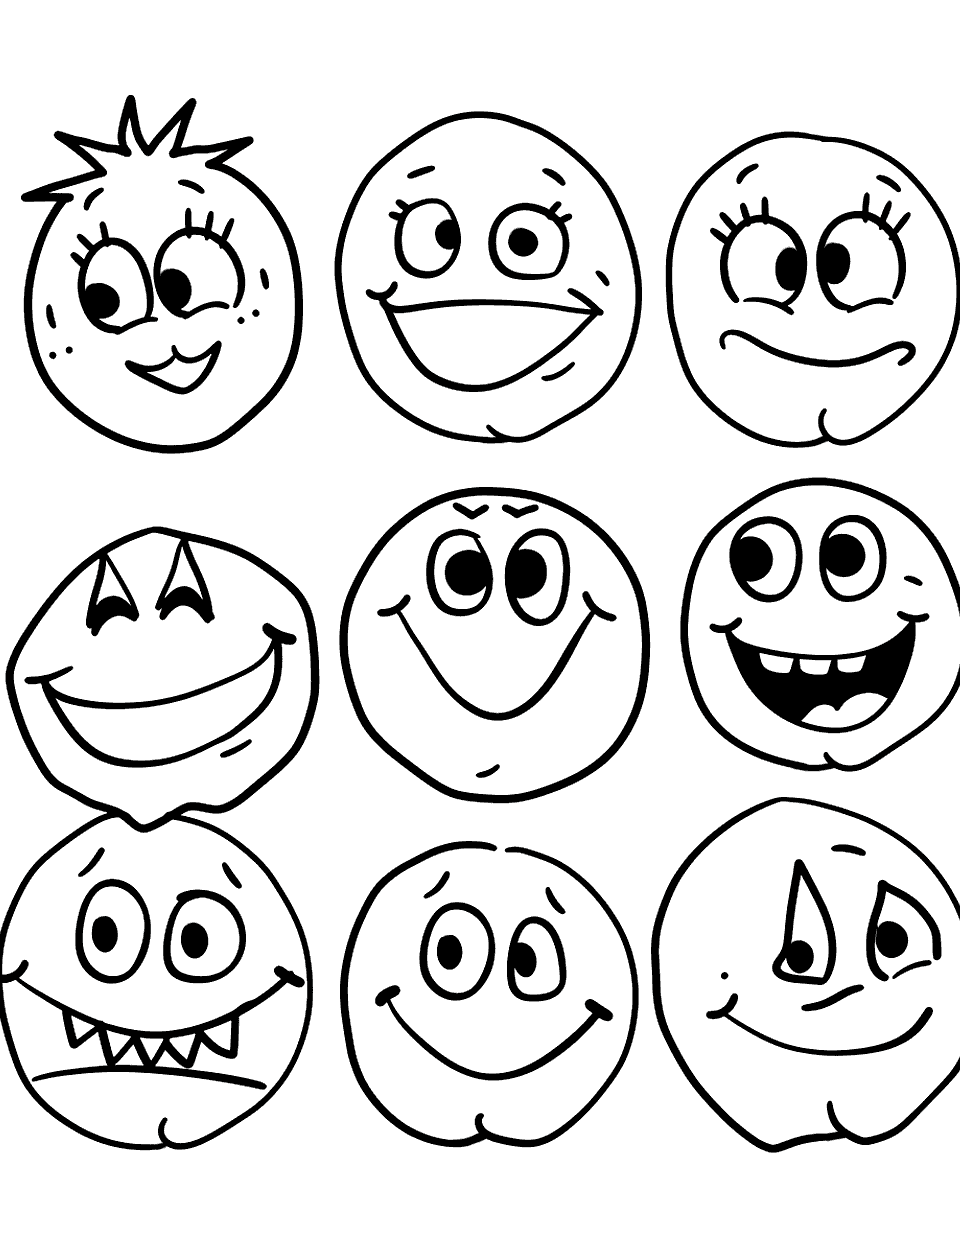 Cute Circle Faces Shapes Coloring Page - Various smiley faces drawn inside circles, each with different expressions.